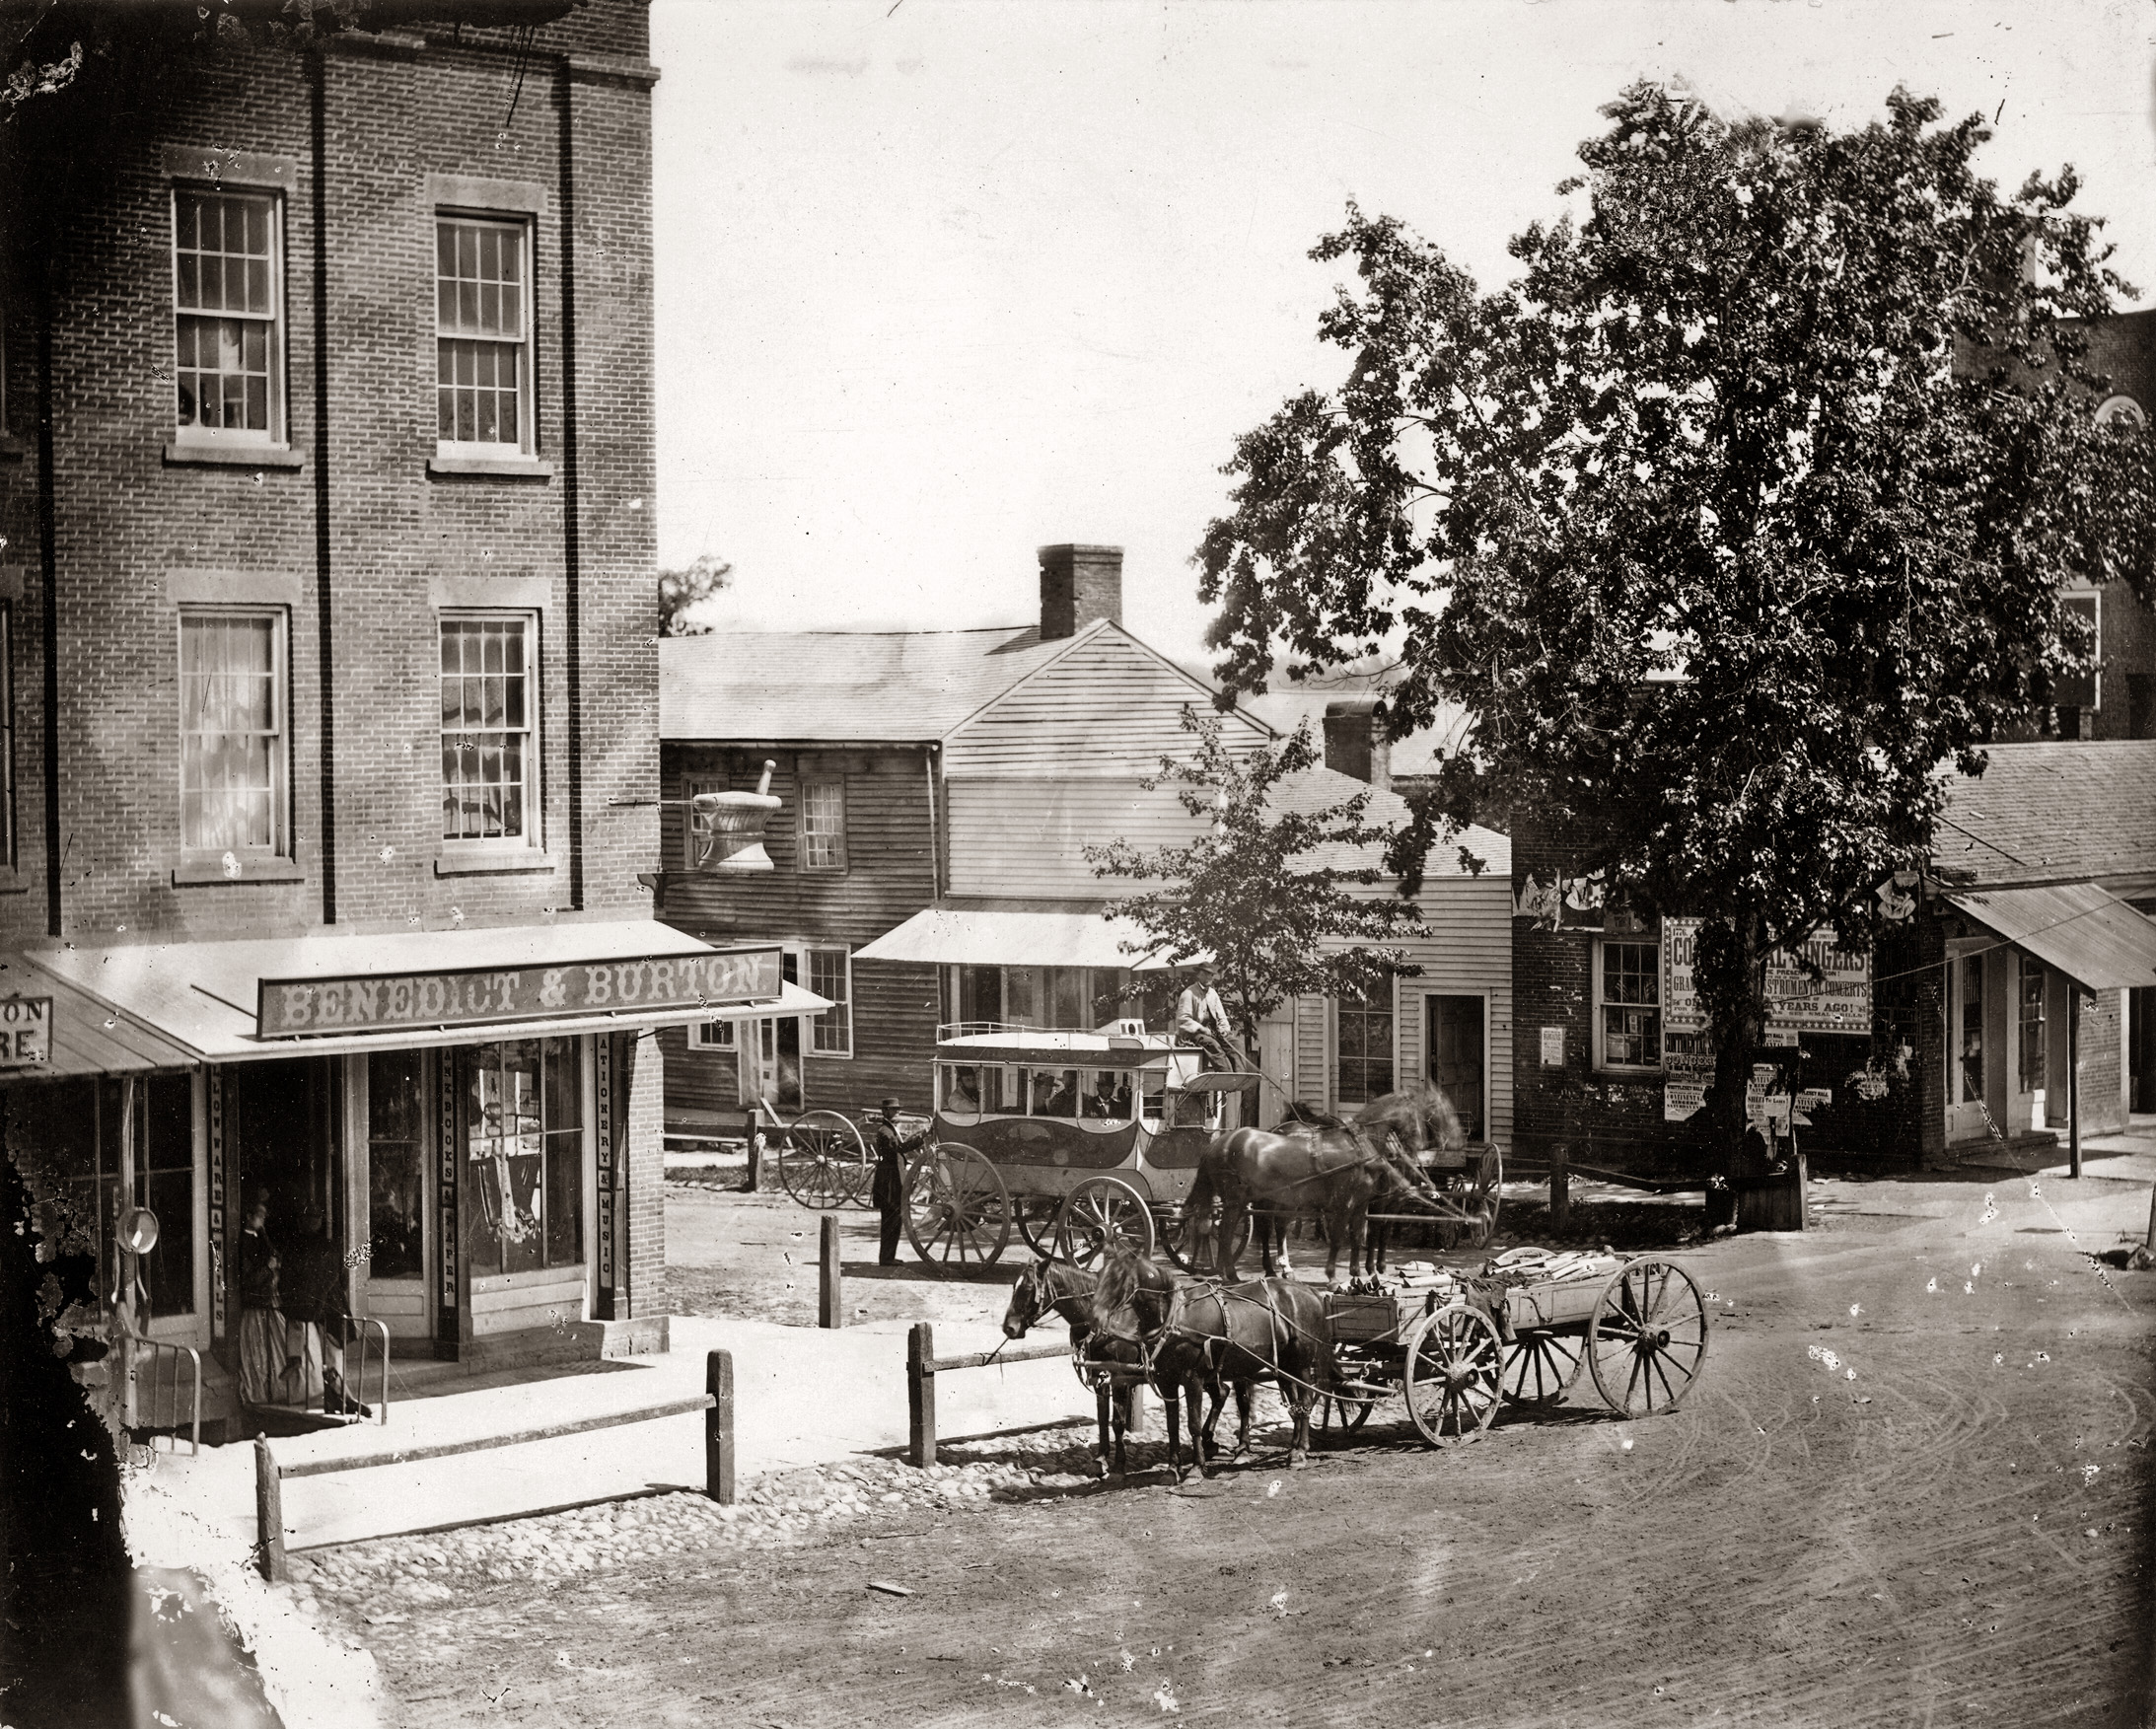 A corner on Main Street in Norwalk Ohio in 1876. The apothecary of Benedict and Burton can be seen, as well as an arriving stagecoach with several Abraham Lincoln look-alikes.  From my grandfather's personal collection. View full size.